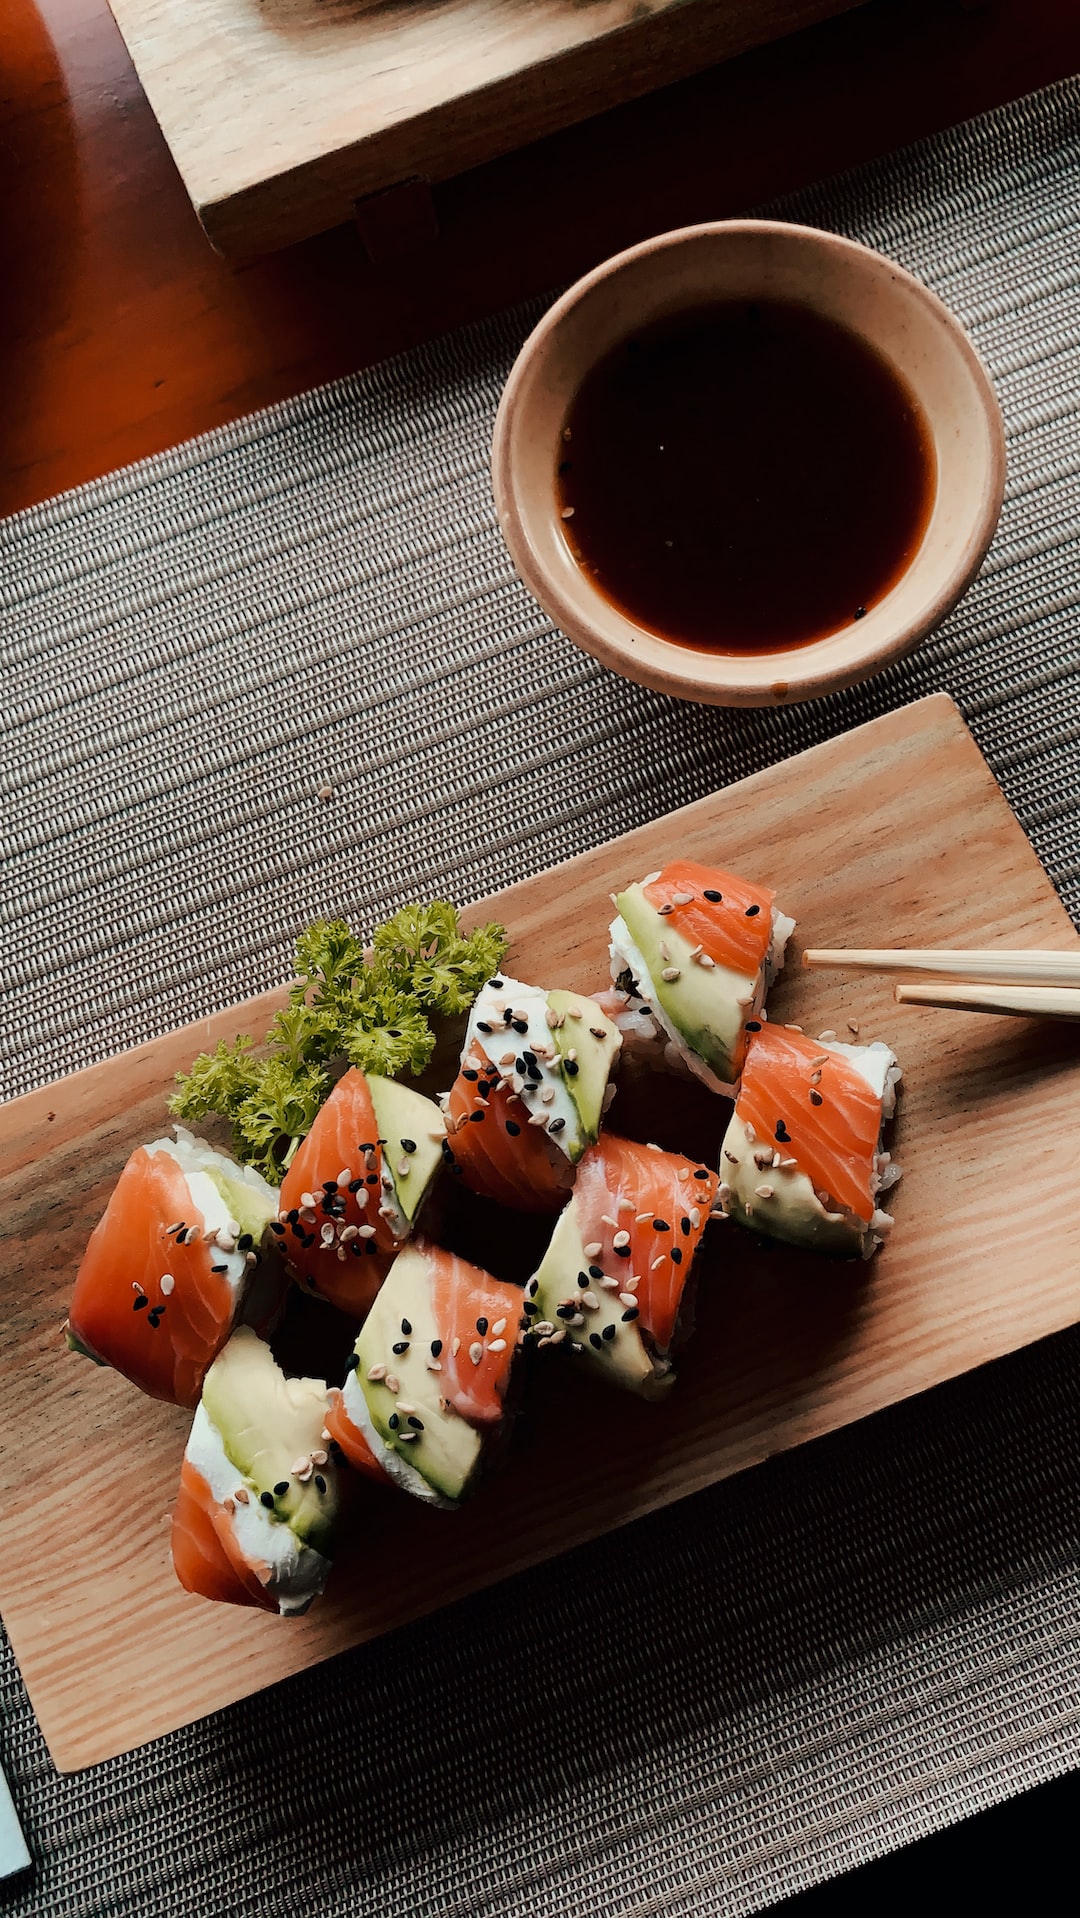 Discover the Delights of Tasty Japanese Food